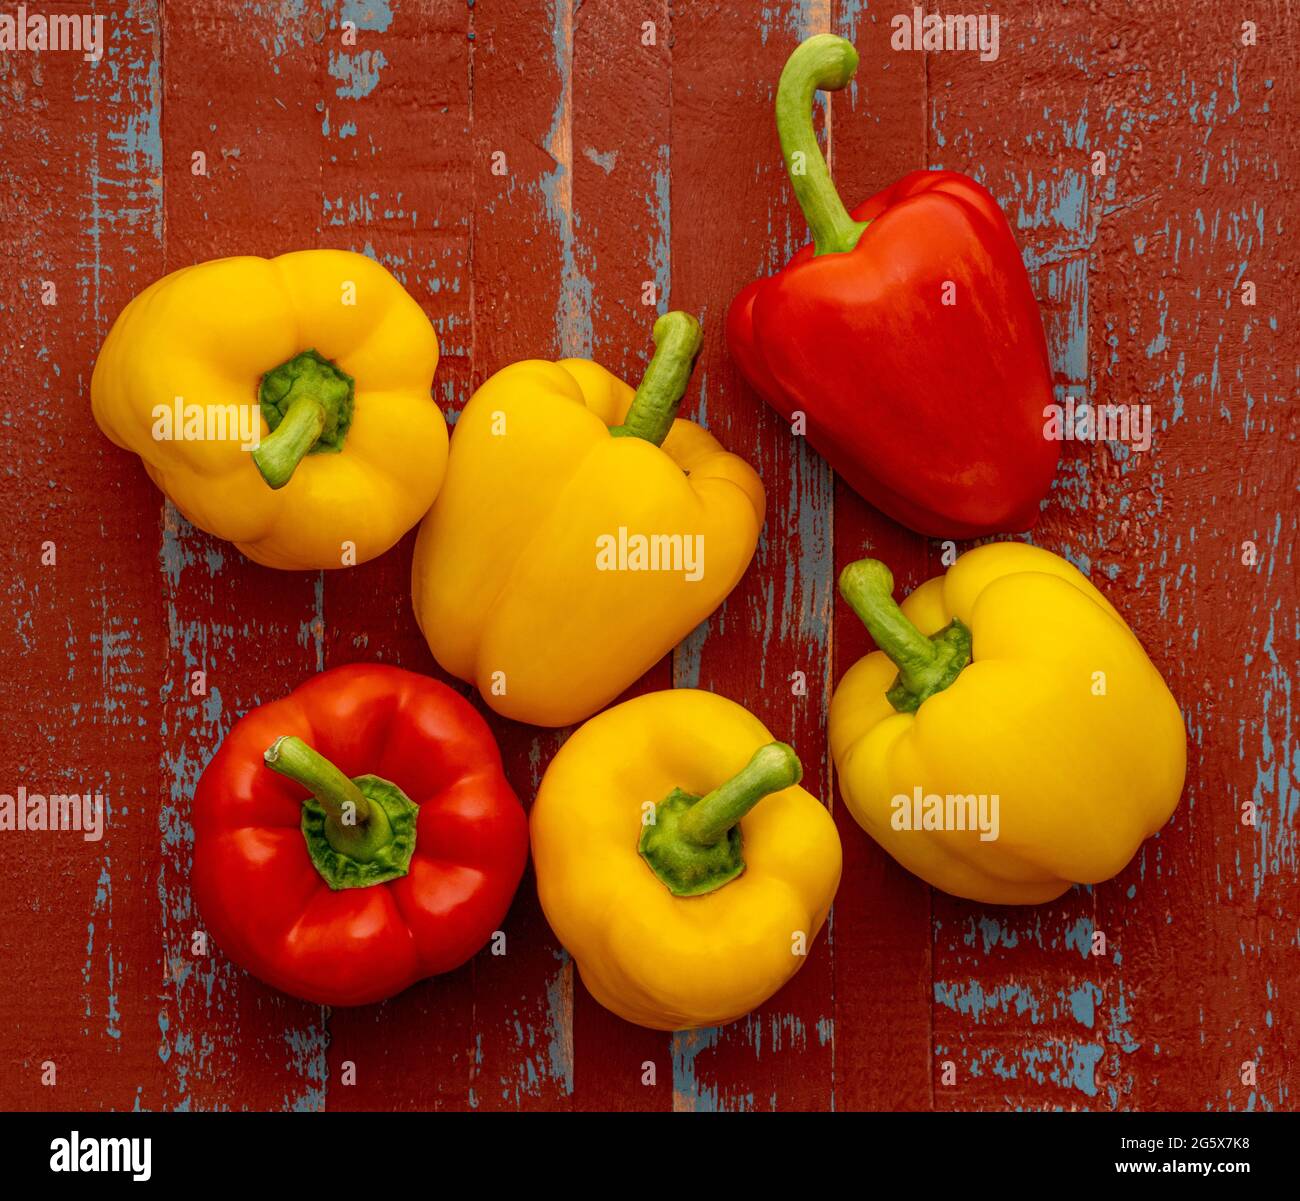 Plan view of red and yellow bell peppers on a brown and blue  wooden background. Stock Photo